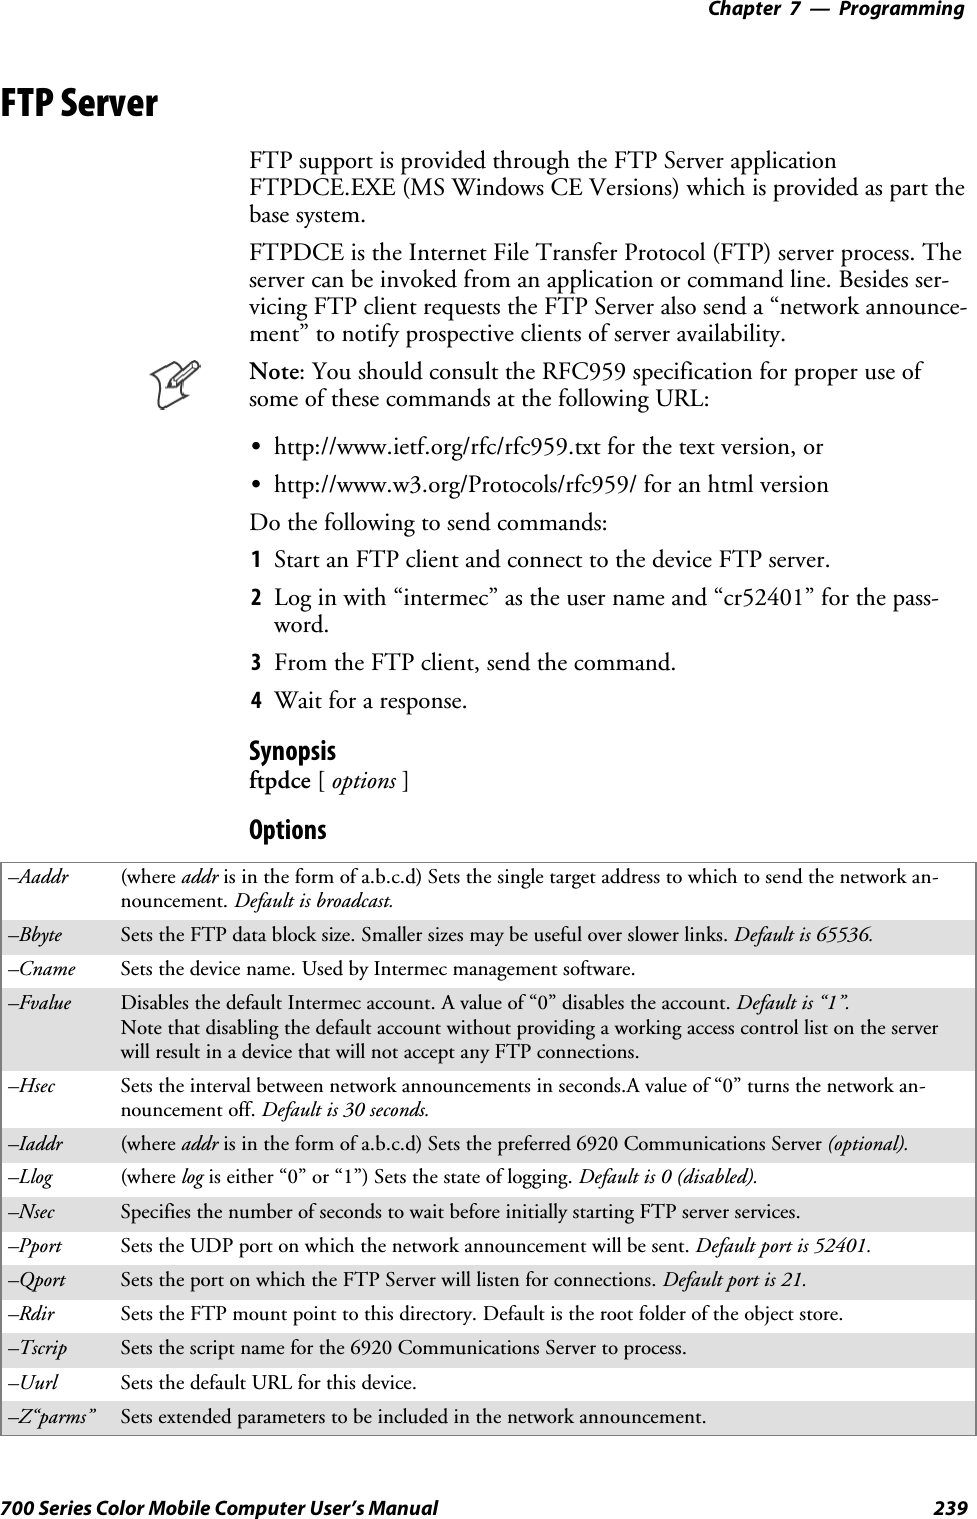 Programming—Chapter 7239700 Series Color Mobile Computer User’s ManualFTP ServerFTP support is provided through the FTP Server applicationFTPDCE.EXE (MS Windows CE Versions) which is provided as part thebase system.FTPDCE is the Internet File Transfer Protocol (FTP) server process. Theserver can be invoked from an application or command line. Besides ser-vicing FTP client requests the FTP Server also send a “network announce-ment” to notify prospective clients of server availability.Note: You should consult the RFC959 specification for proper use ofsome of these commands at the following URL:Shttp://www.ietf.org/rfc/rfc959.txt for the text version, orShttp://www.w3.org/Protocols/rfc959/ for an html versionDo the following to send commands:1Start an FTP client and connect to the device FTP server.2Log in with “intermec” as the user name and “cr52401” for the pass-word.3From the FTP client, send the command.4Wait for a response.Synopsisftpdce [options ]Options–Aaddr (where addr is in the form of a.b.c.d) Sets the single target address to which to send the network an-nouncement. Default is broadcast.–Bbyte Sets the FTP data block size. Smaller sizes may be useful over slower links. Default is 65536.–Cname Sets the device name. Used by Intermec management software.–Fvalue Disables the default Intermec account. A value of “0” disables the account. Default is “1”.Note that disabling the default account without providing a working access control list on the serverwill result in a device that will not accept any FTP connections.–Hsec Sets the interval between network announcements in seconds.A value of “0” turns the network an-nouncement off. Default is 30 seconds.–Iaddr (where addr is in the form of a.b.c.d) Sets the preferred 6920 Communications Server (optional).–Llog (where log is either “0” or “1”) Sets the state of logging. Default is 0 (disabled).–Nsec Specifies the number of seconds to wait before initially starting FTP server services.–Pport Sets the UDP port on which the network announcement will be sent. Default port is 52401.–Qport Sets the port on which the FTP Server will listen for connections. Defaultportis21.–Rdir Sets the FTP mount point to this directory. Default is the root folder of the object store.–Tscrip Sets the script name for the 6920 Communications Server to process.–Uurl Sets the default URL for this device.–Z“parms” Sets extended parameters to be included in the network announcement.